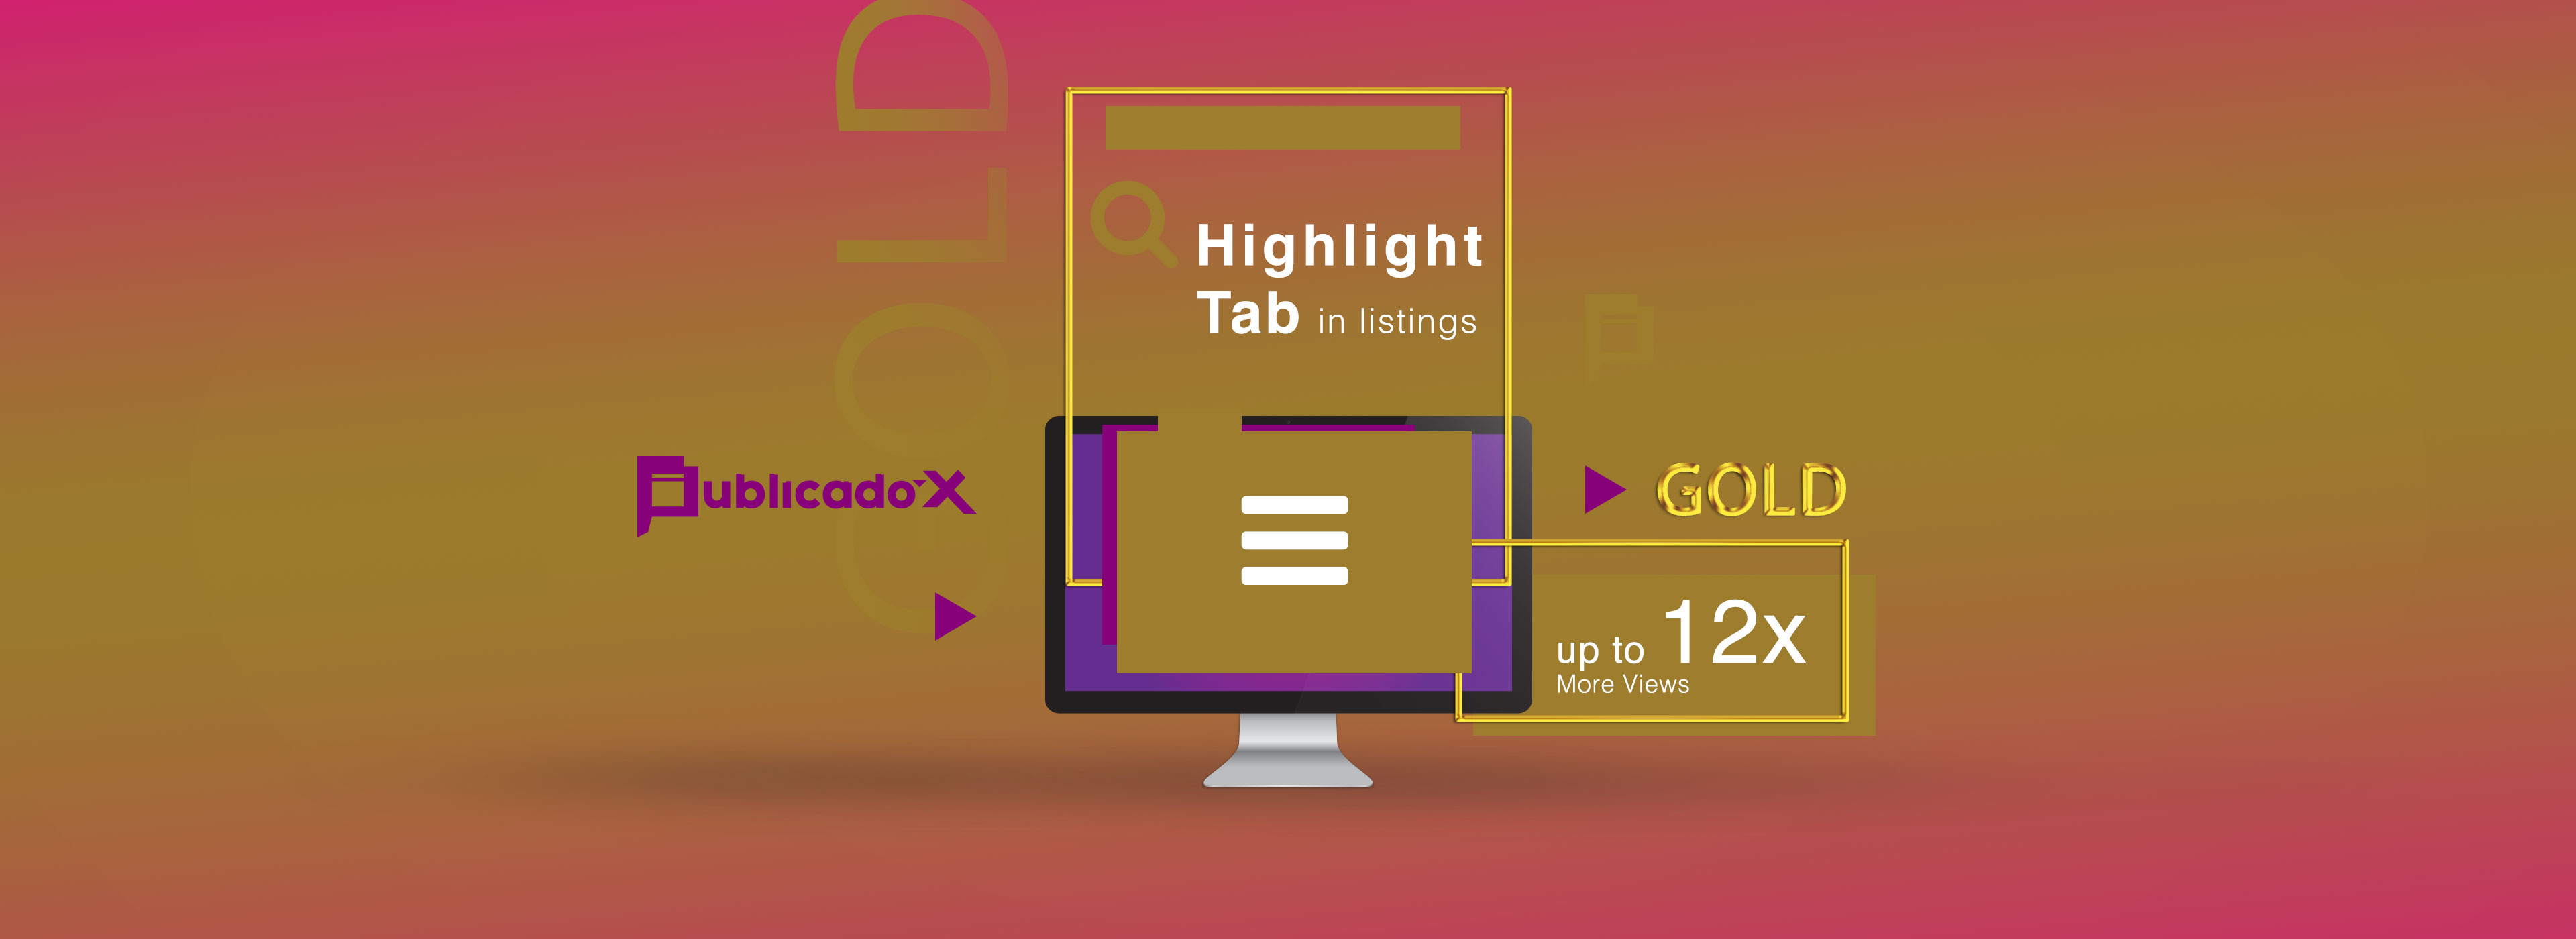 With the Gold Highlight, your ad will appear directly on our Homepage, in a special block on the right of the category's search and profile pages and you can, up to 1 Month, benefit from 12X more views.